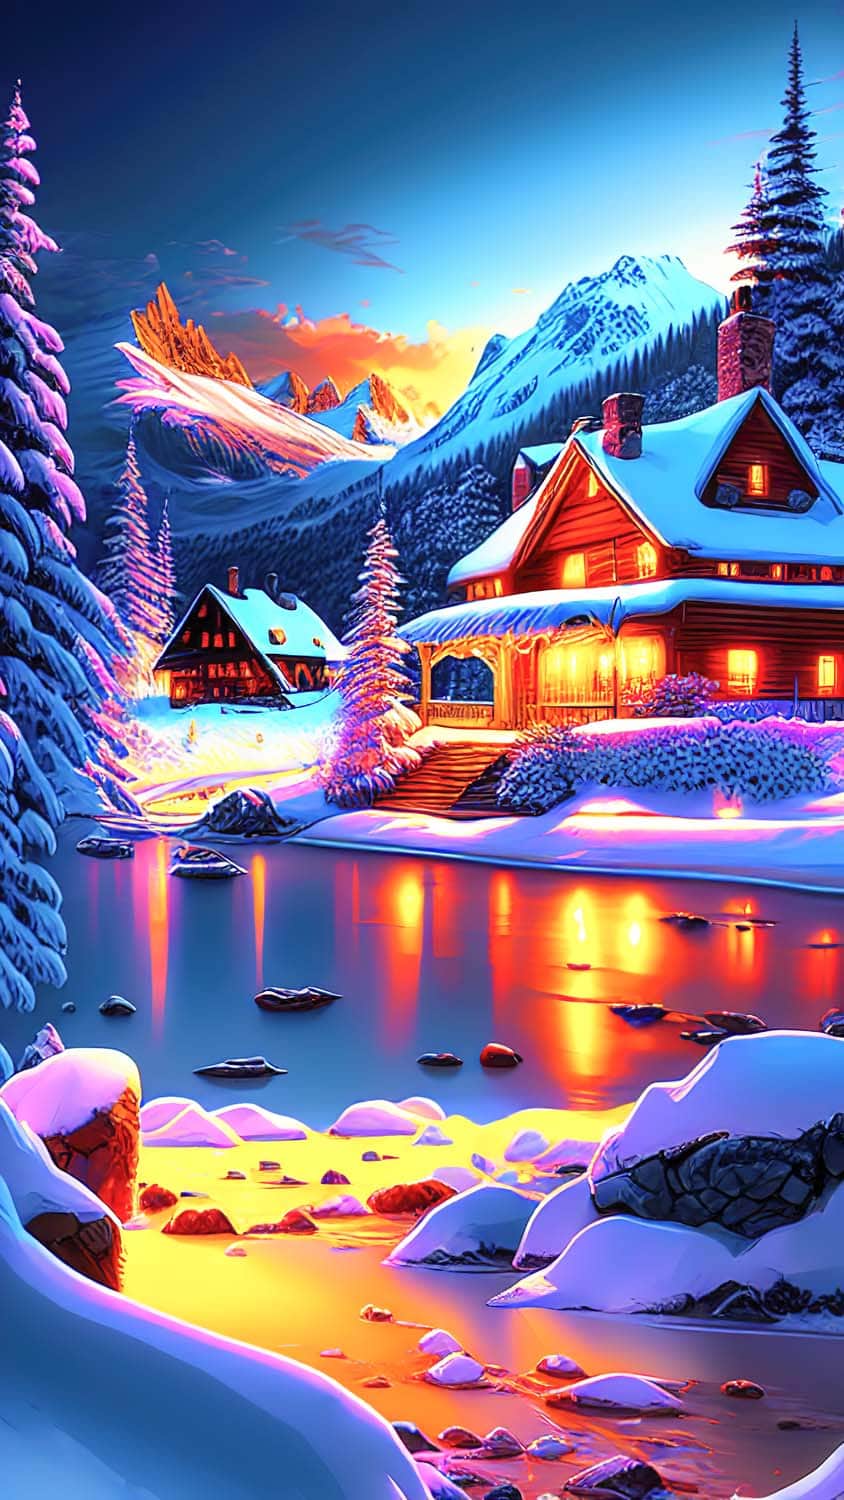 Scenic View In Snow IPhone Wallpaper HD - IPhone Wallpapers : iPhone  Wallpapers